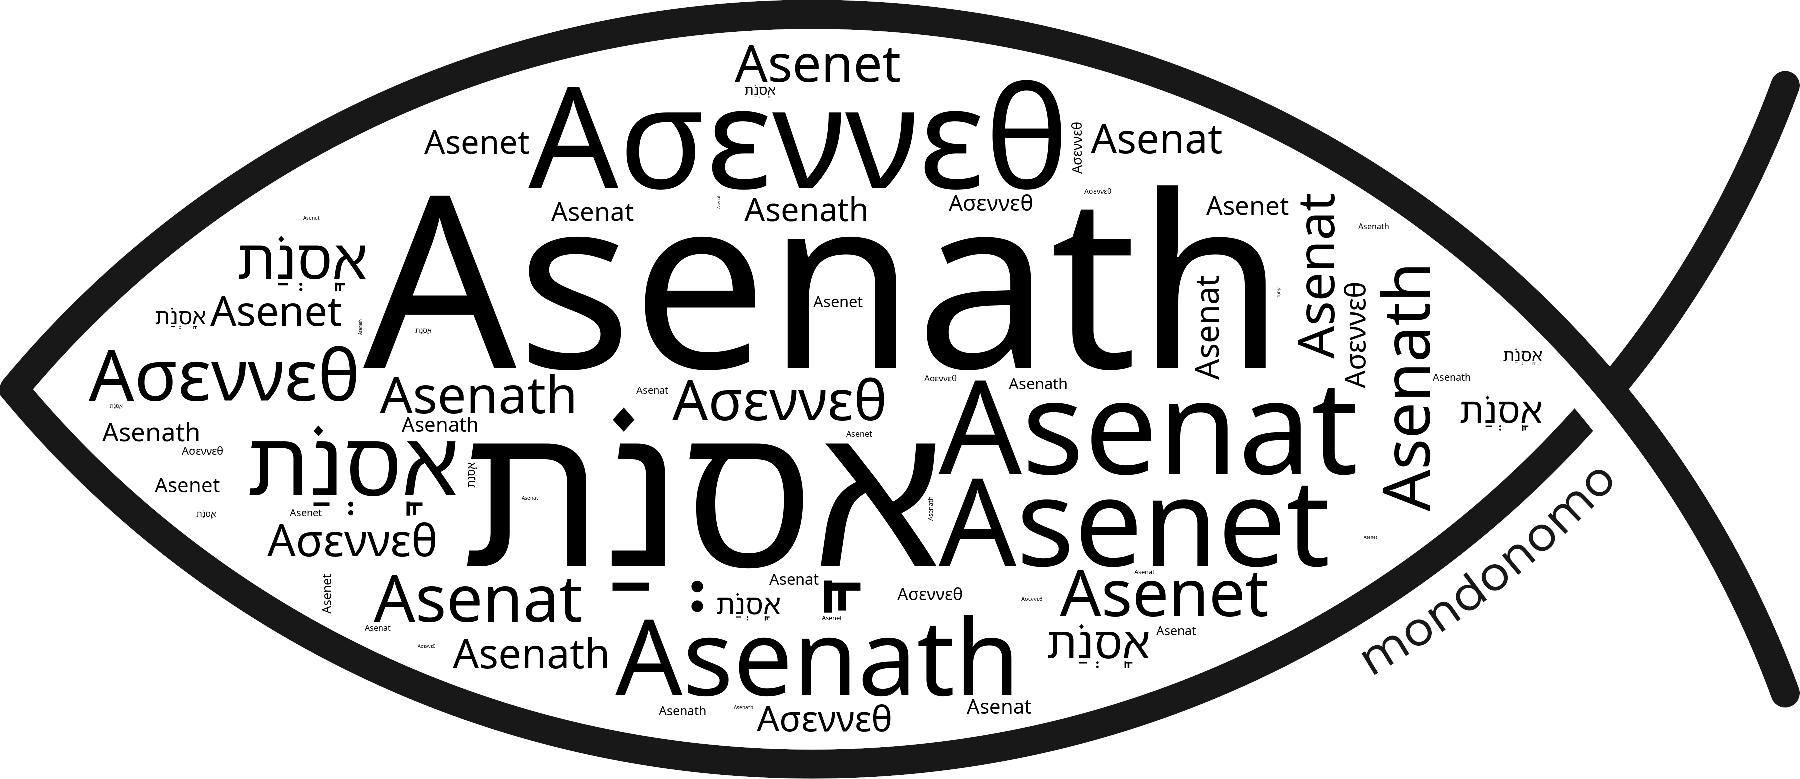 Name Asenath in the world's Bibles